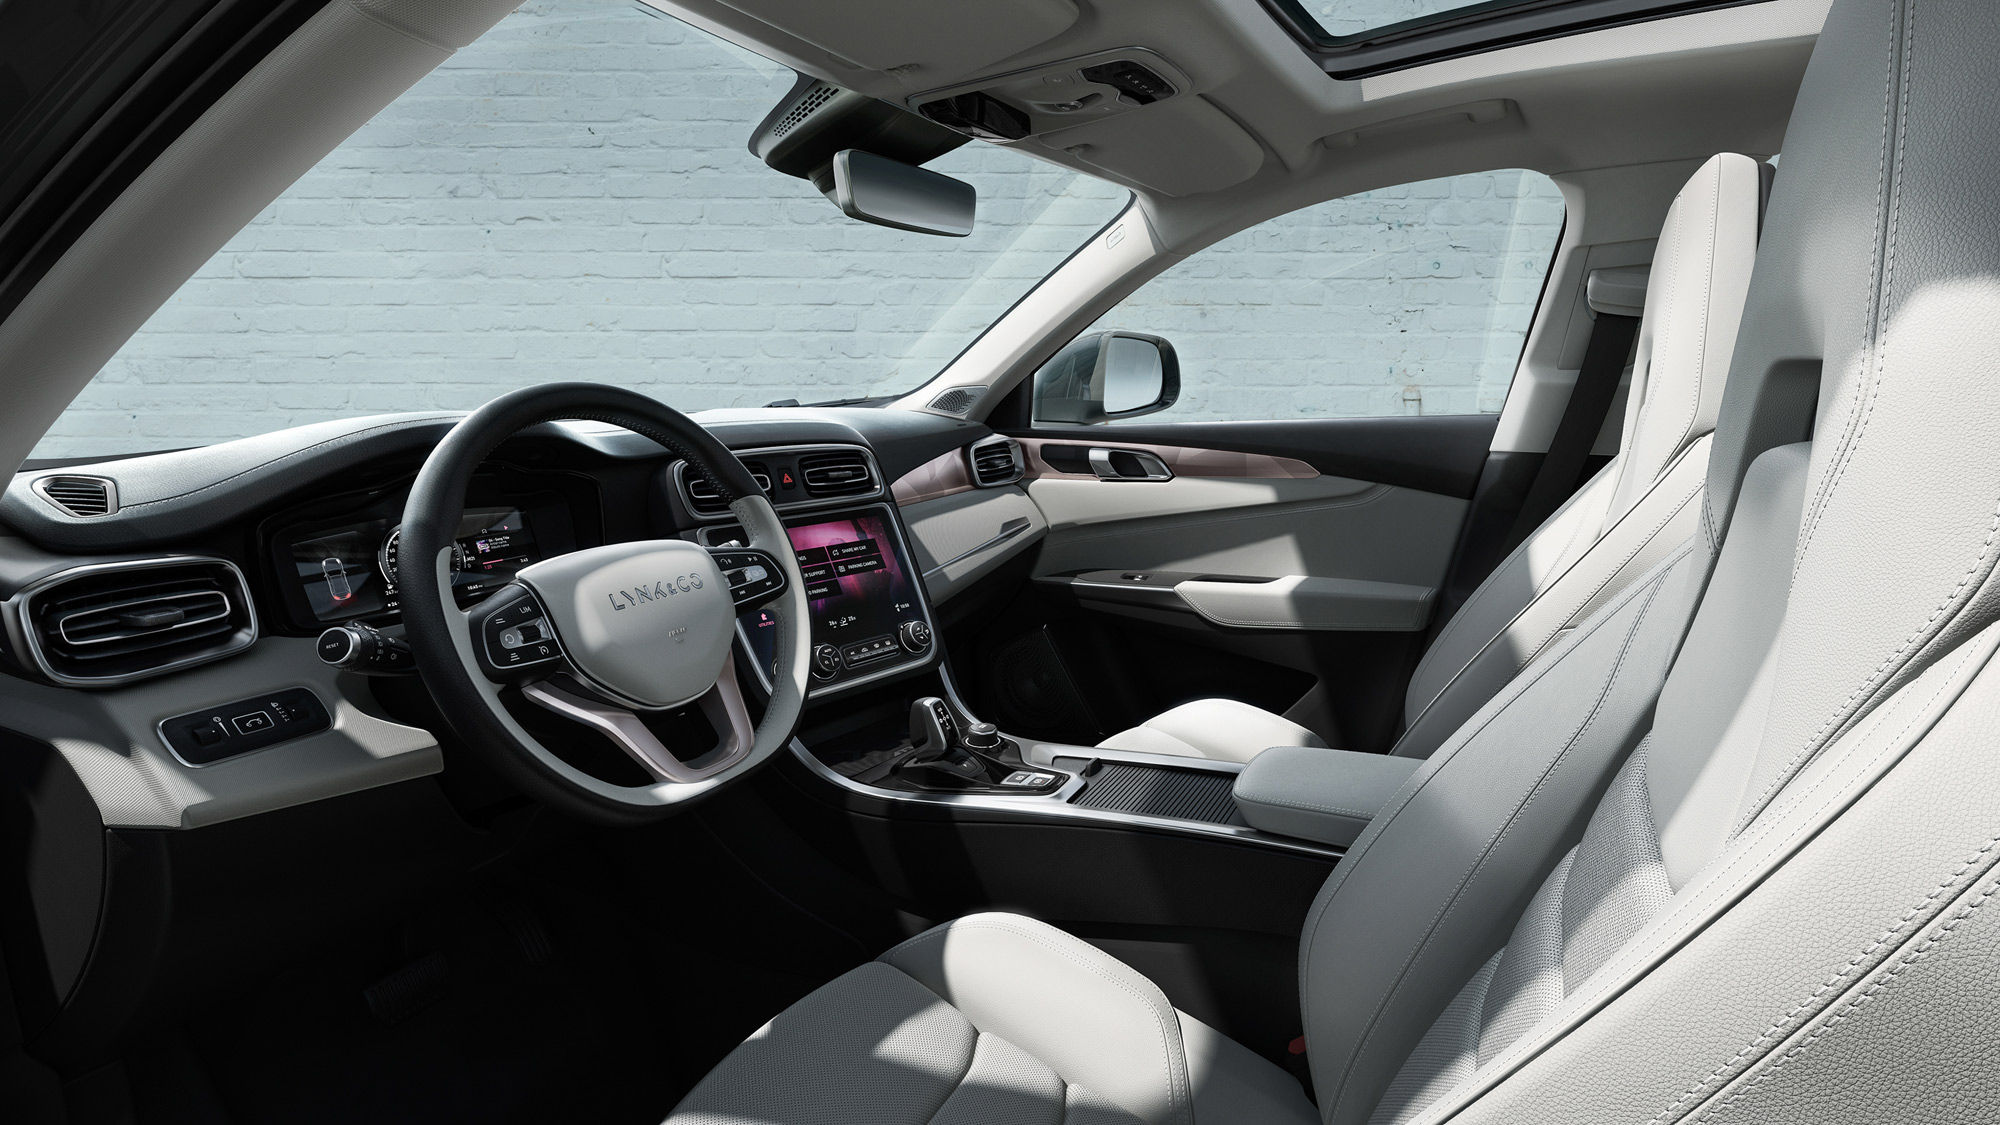 Lynk & Co 01 connected SUV interior